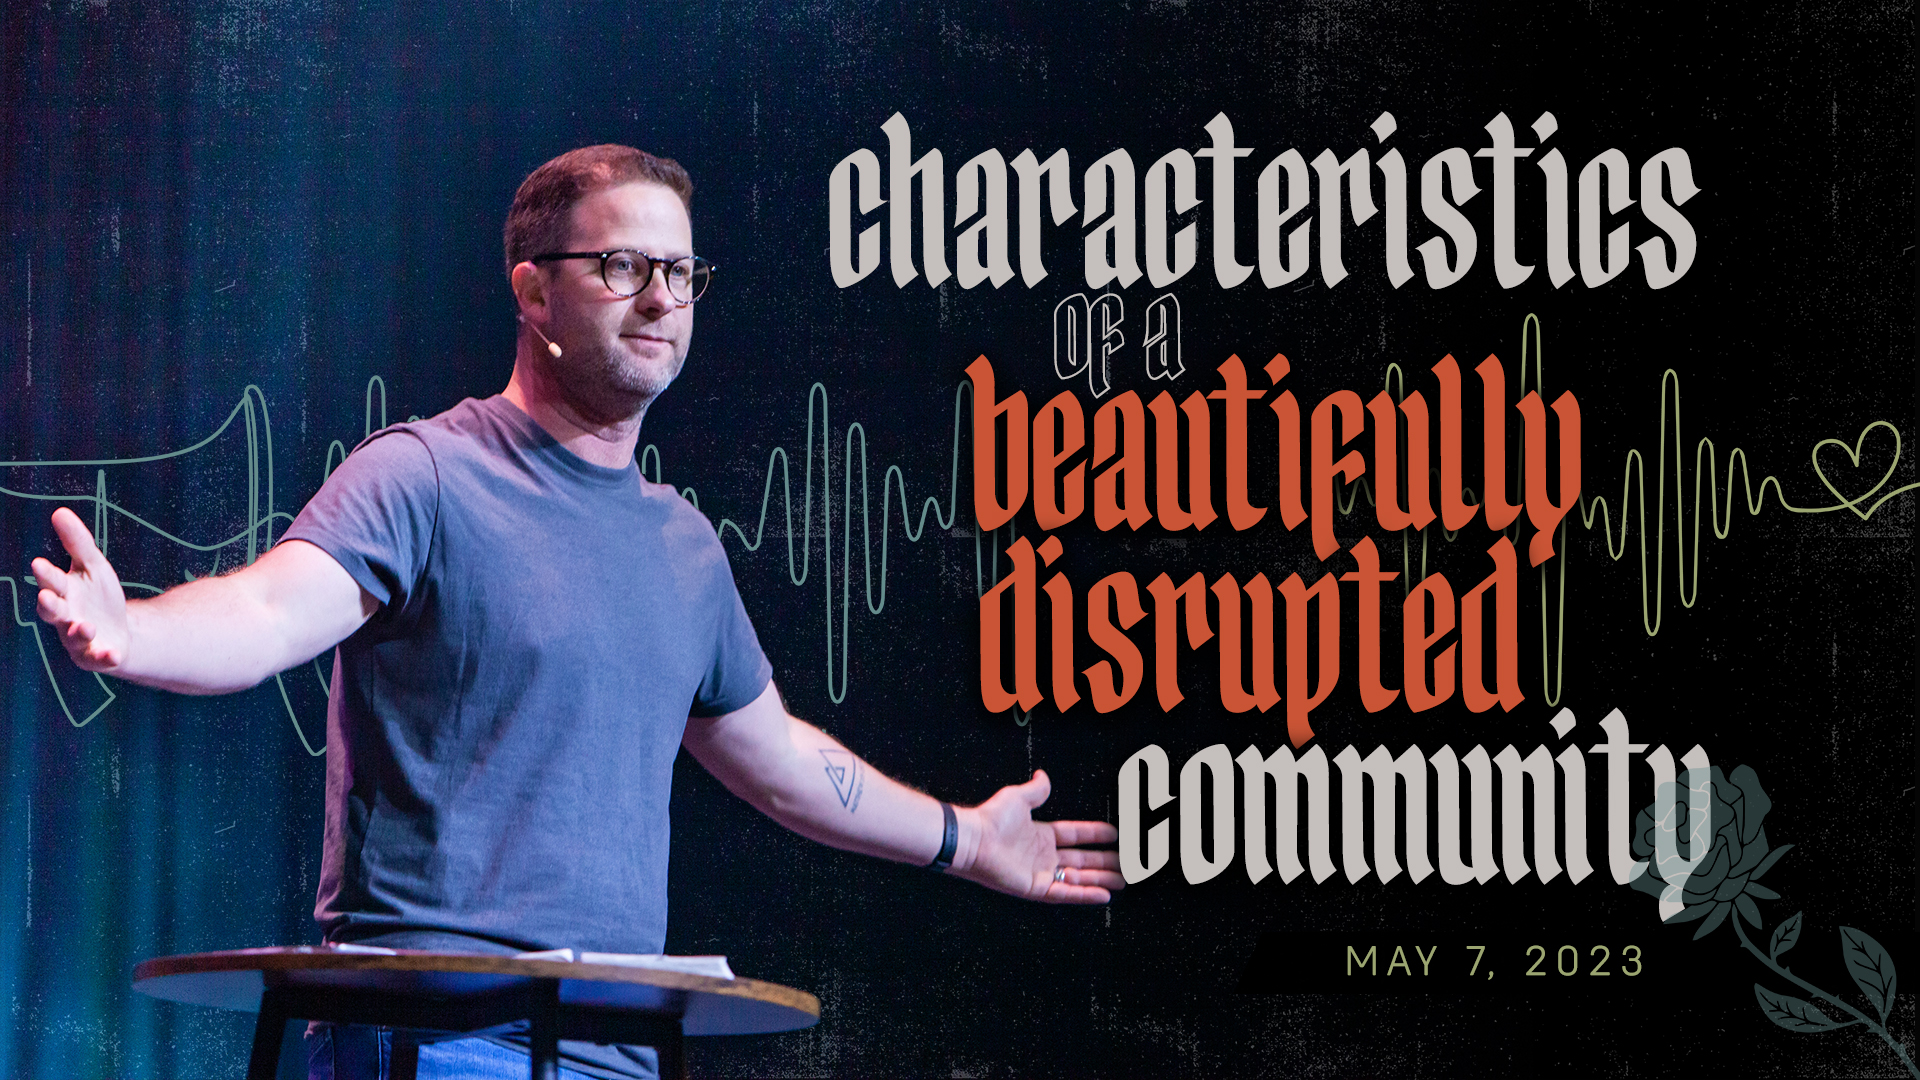 Characteristics of a Beautifully Disrupted Community Image